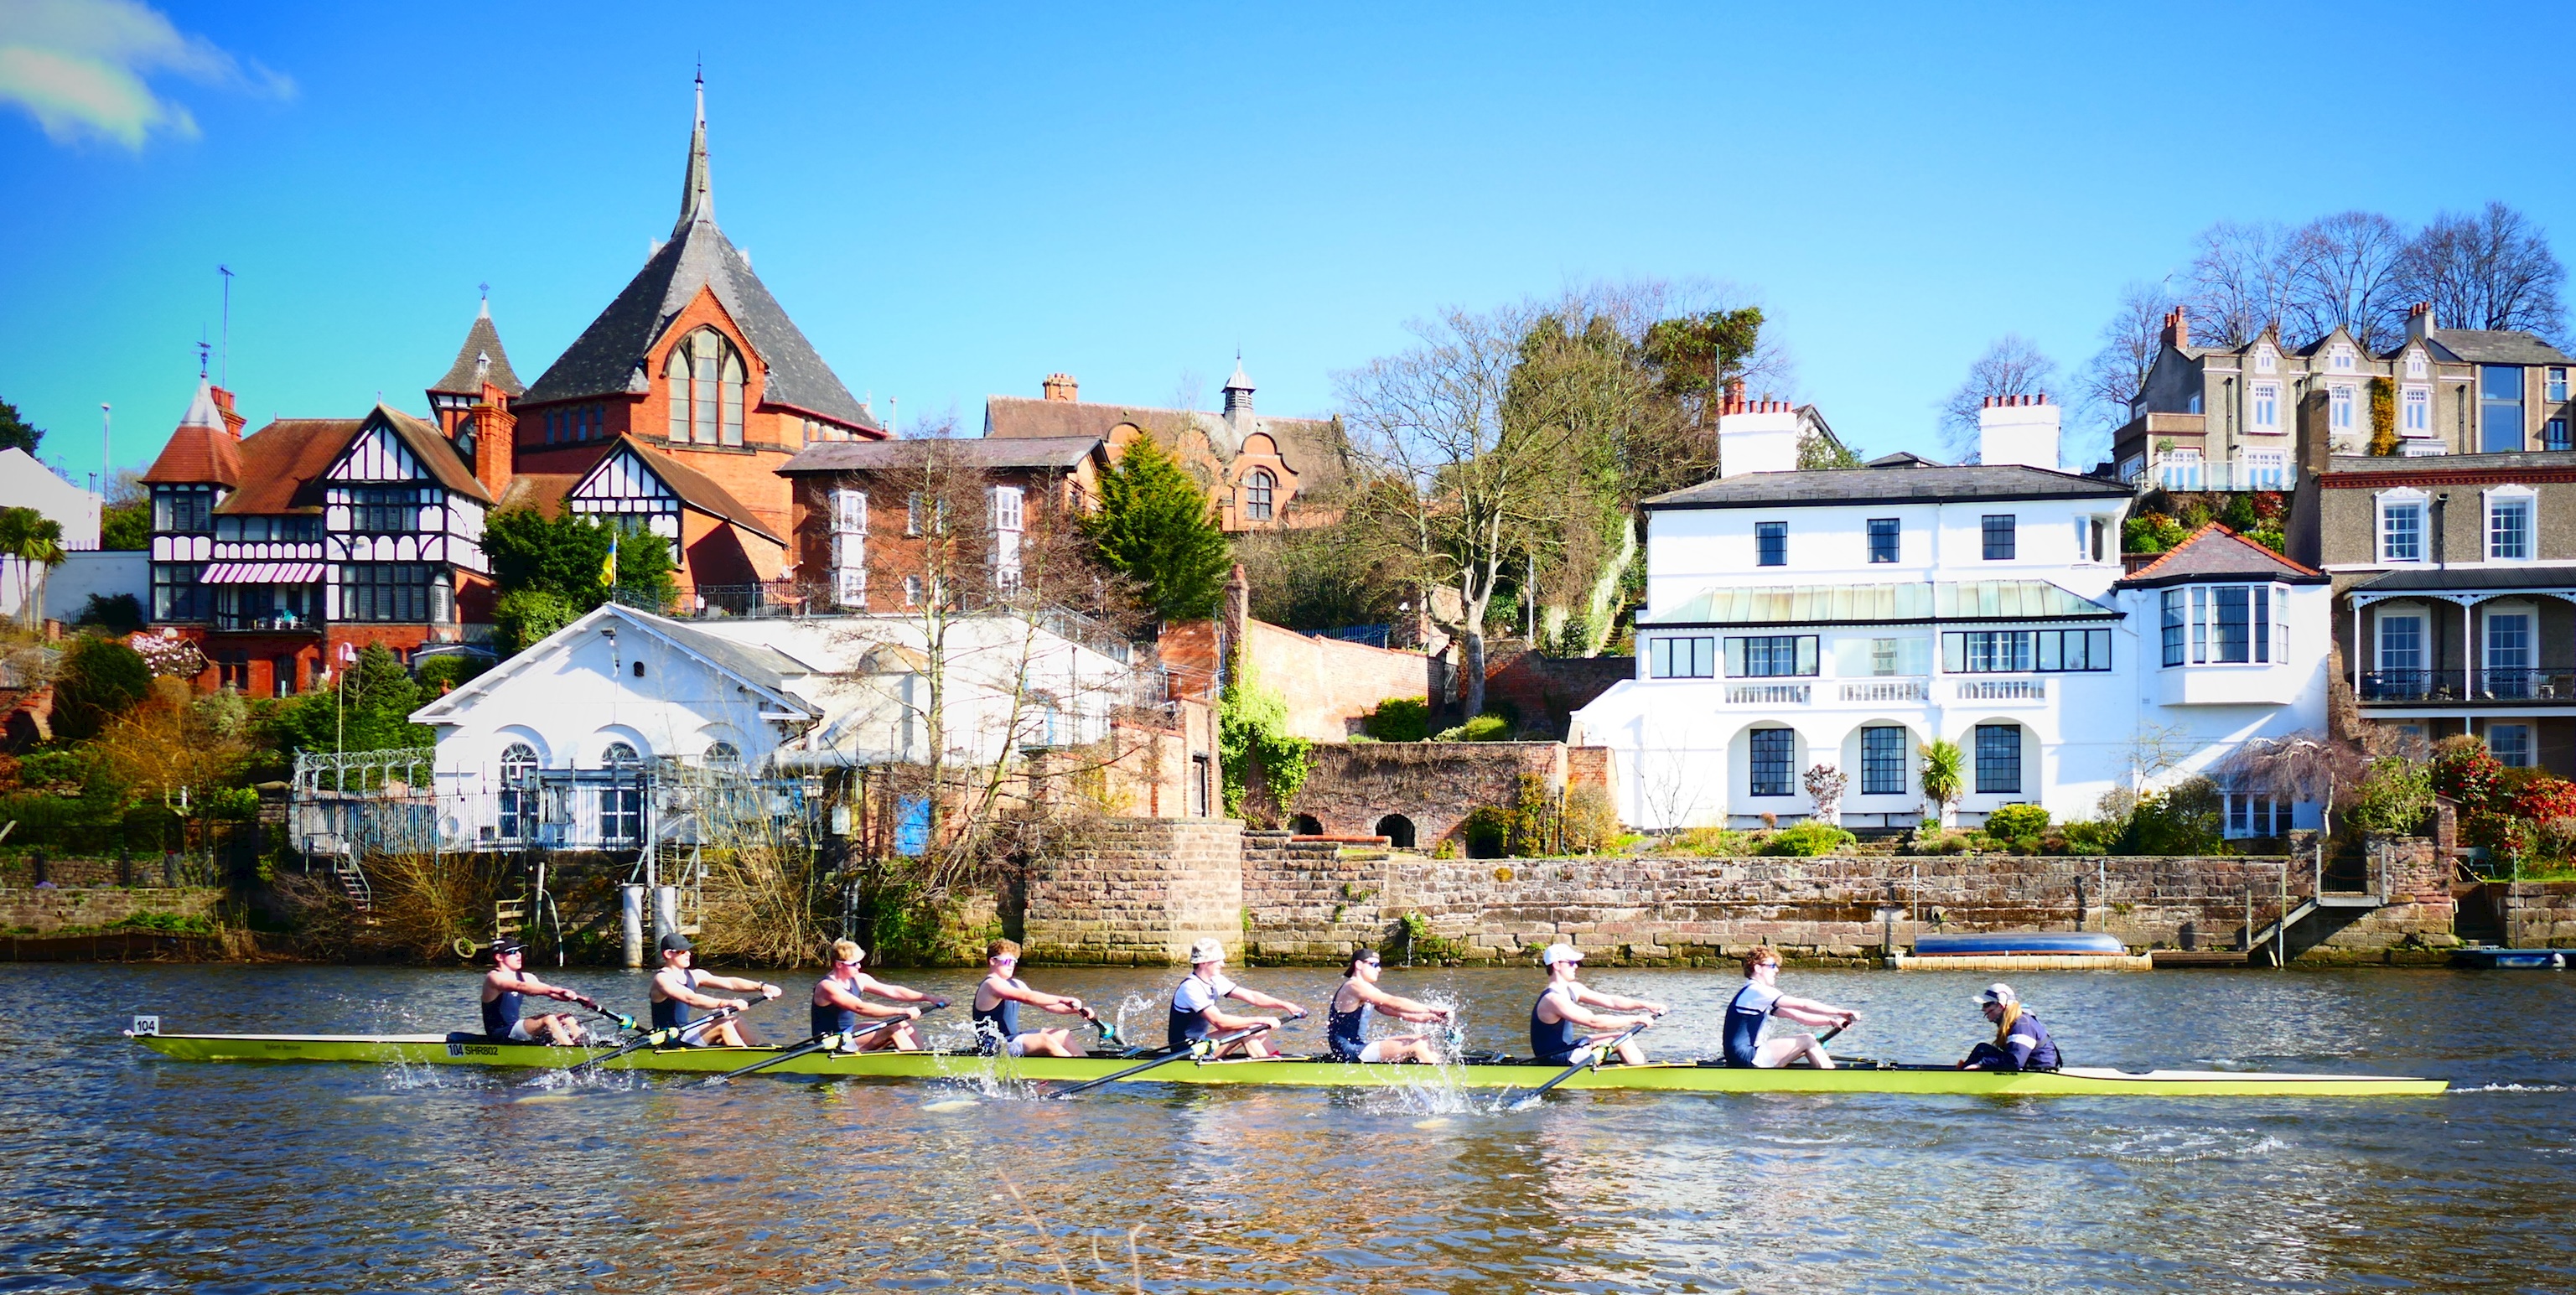 Success for crews at North of England Head and selection for GB Assessments for rowers